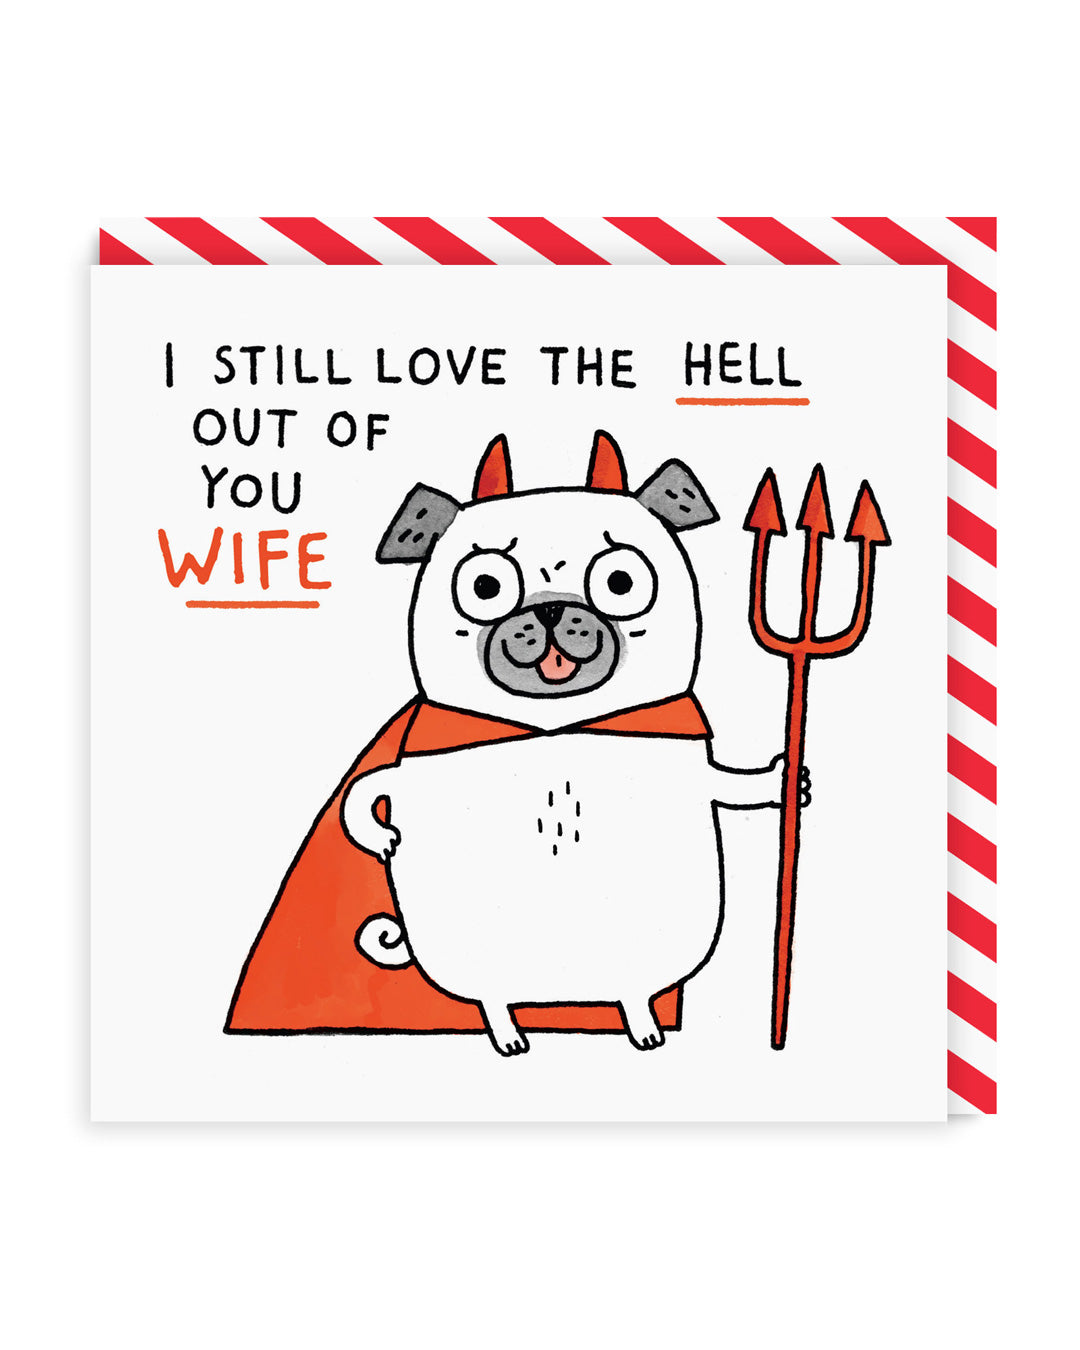 Valentine’s Day | Valentines Card For Him or Her | Wife Love The Hell Out Of You Square Greeting Card | Ohh Deer Unique Valentine’s Card | Artwork by Gemma Correll | Made In The UK, Eco-Friendly Materials, Plastic Free Packaging